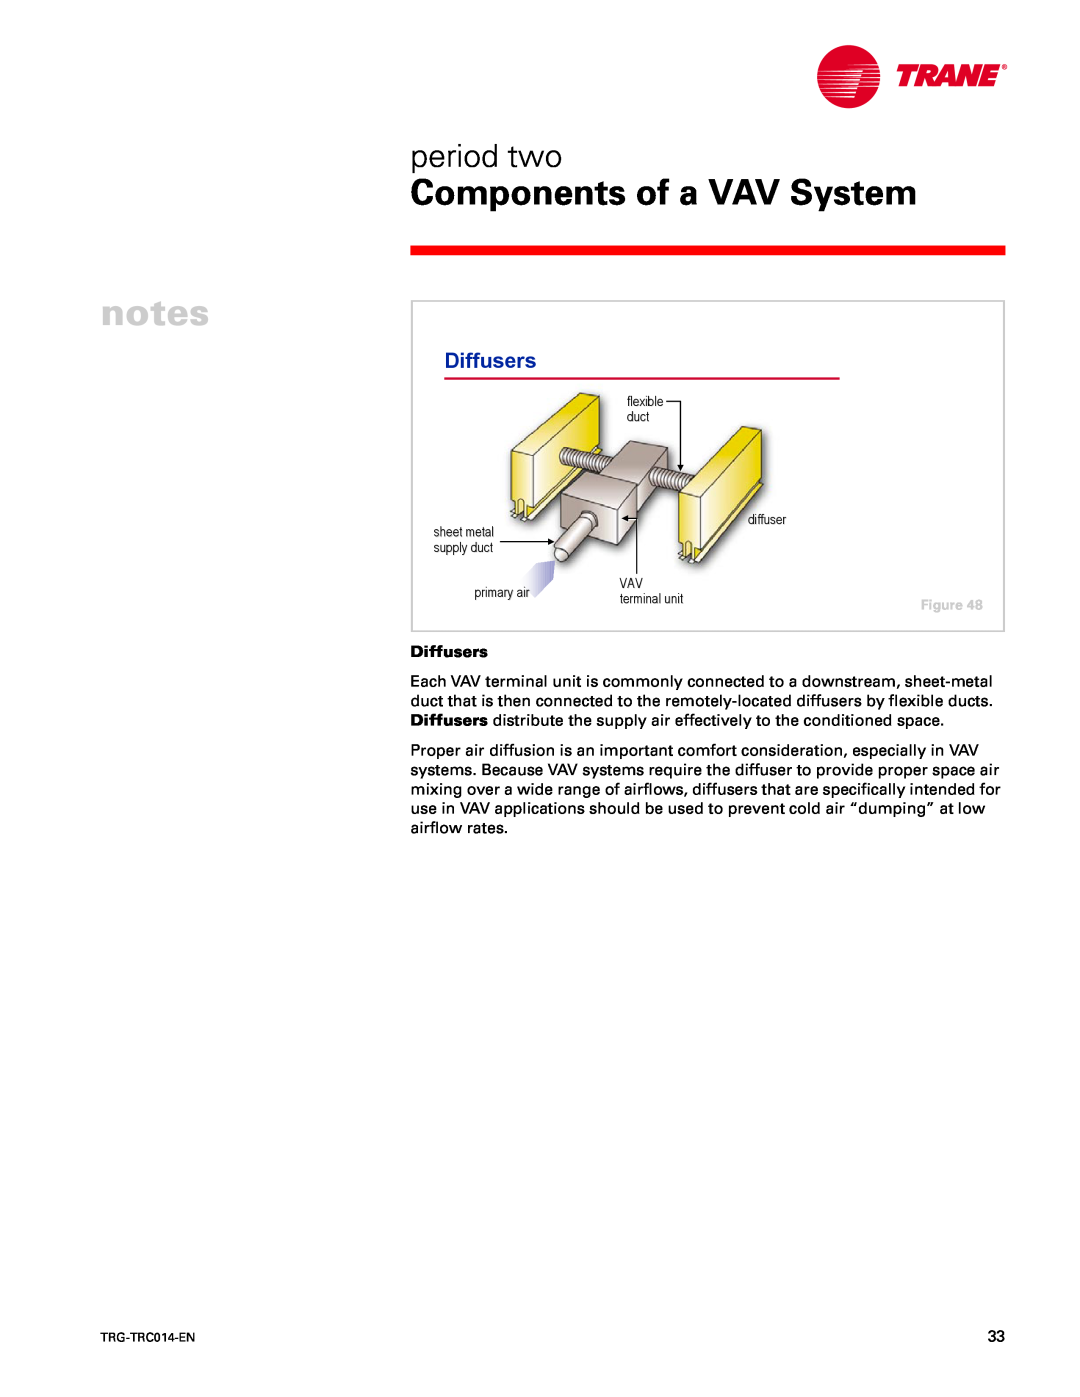 Trane TRG-TRC014-EN manual Diffusers, Components of a VAV System, period two 